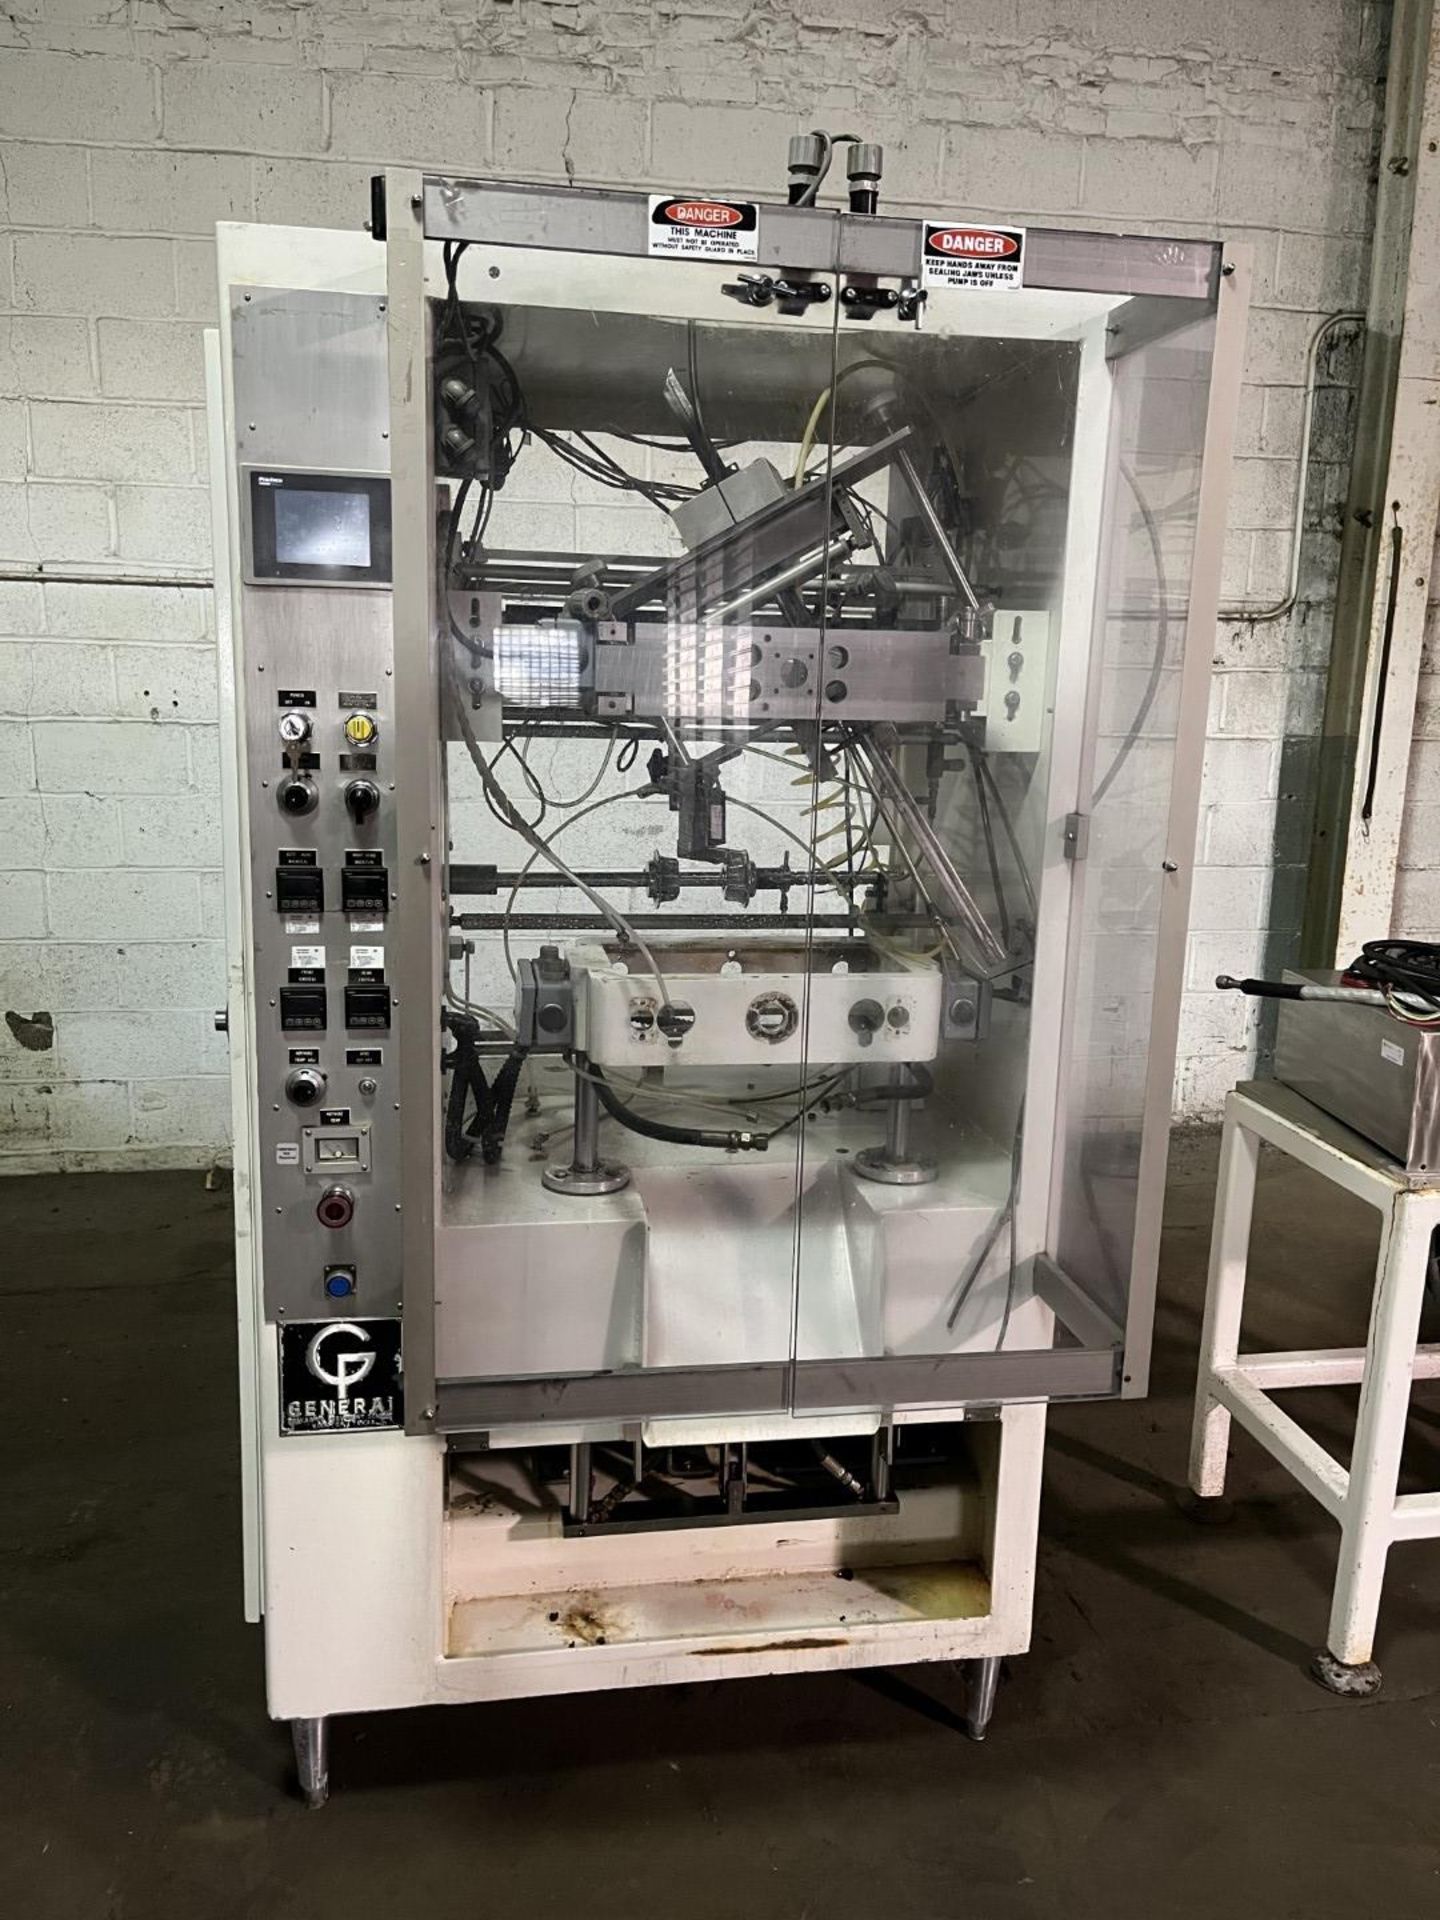 General Packaging Vertical Fill Form and Seal Machine. **See Auctioneers Note** - Image 2 of 20